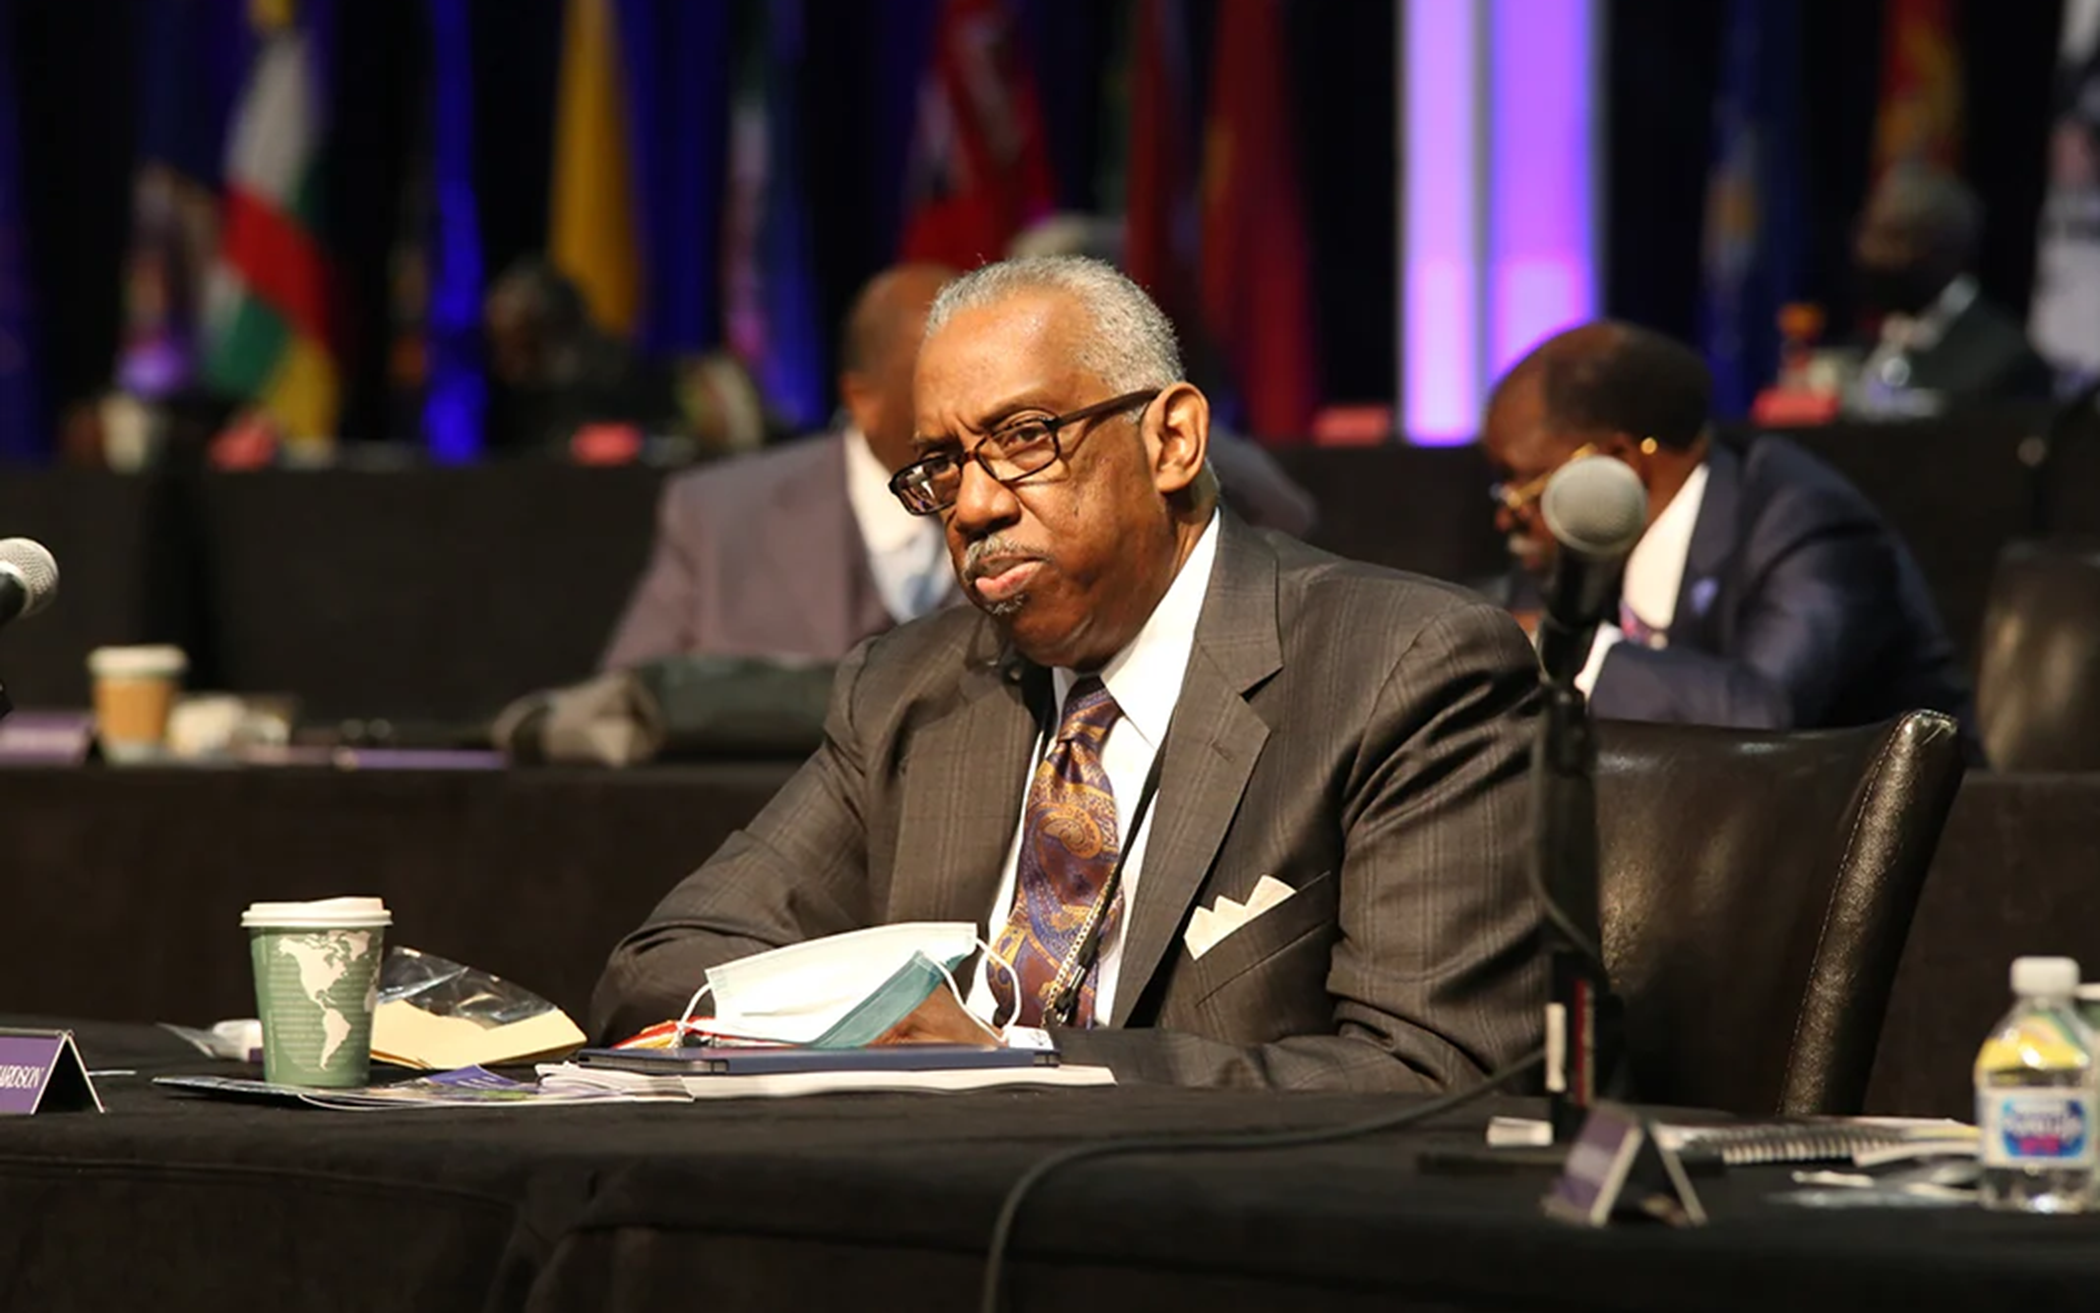 African Methodist Episcopal Church to Form Sexual Ethics Discernment Committee